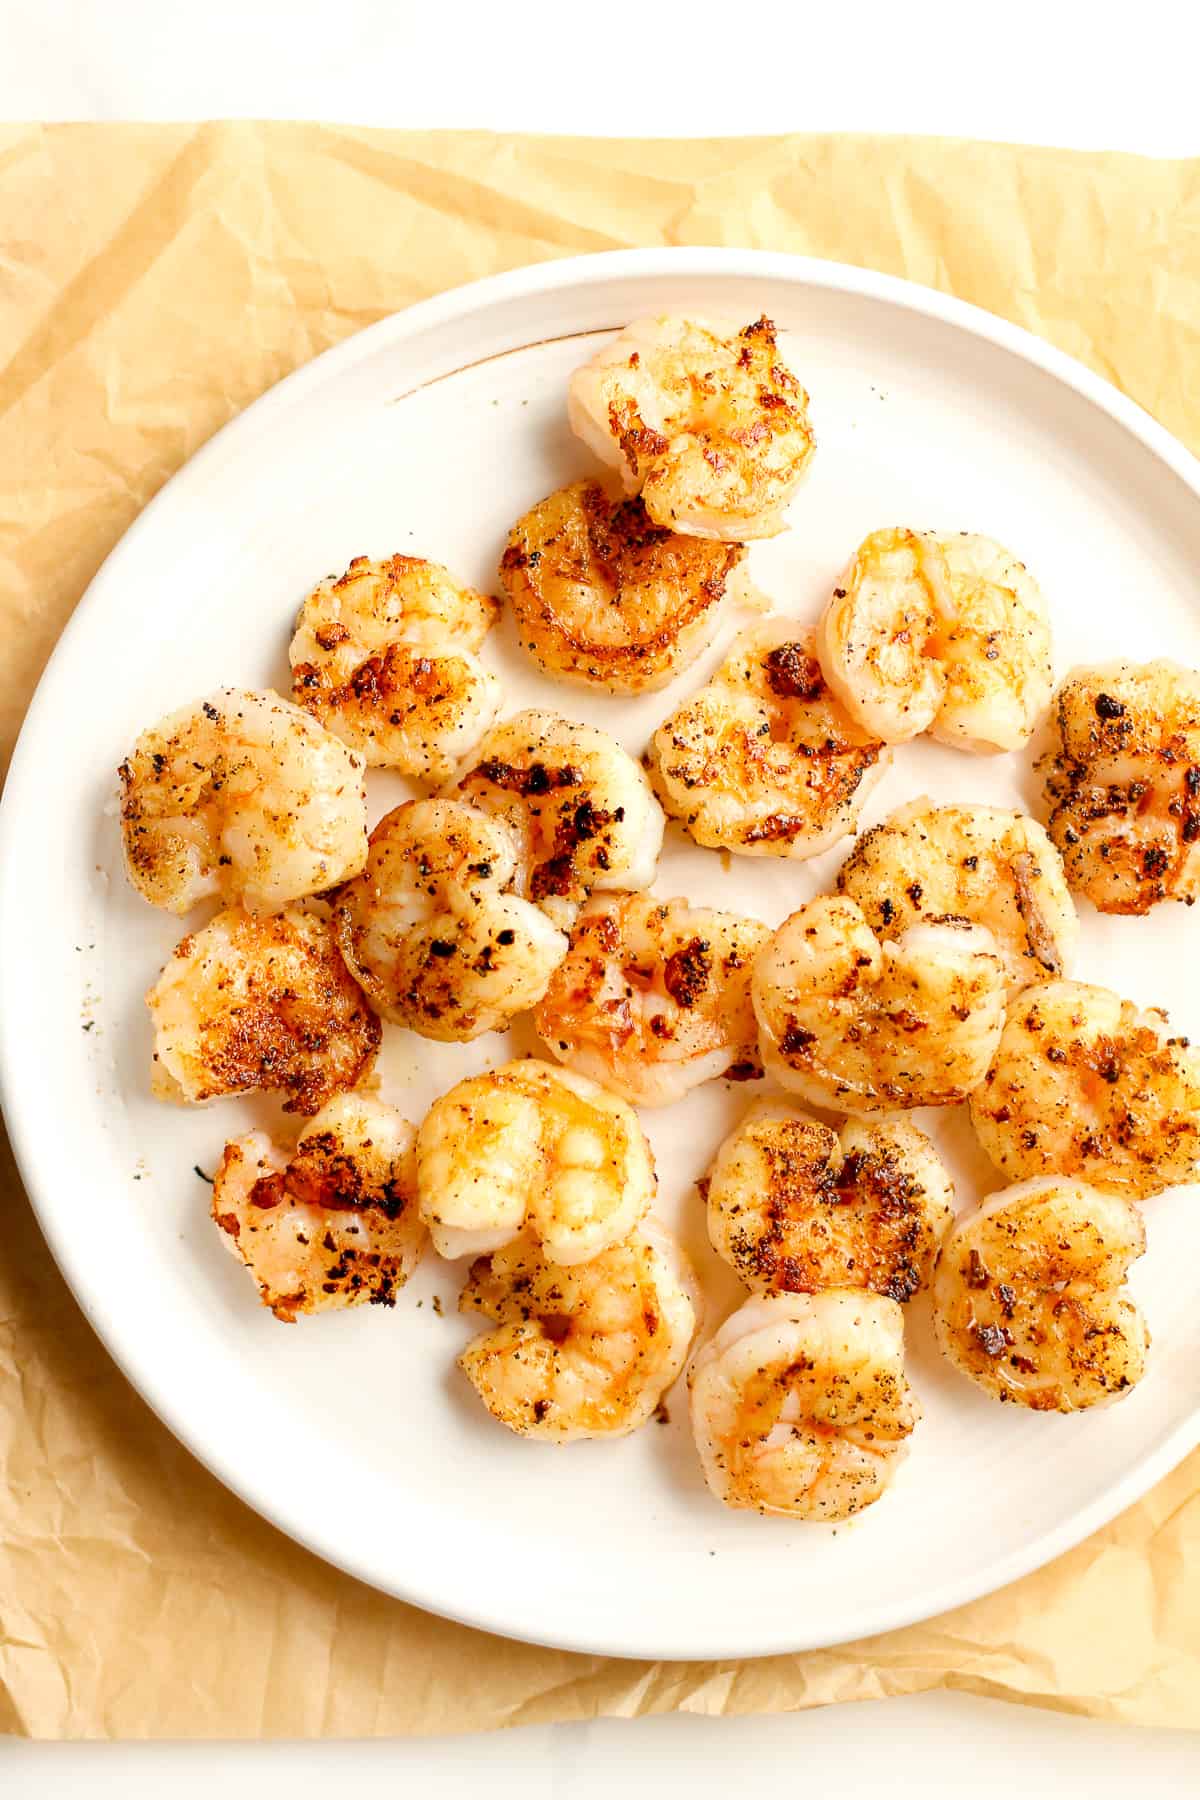 A plate of grilled shrimp.